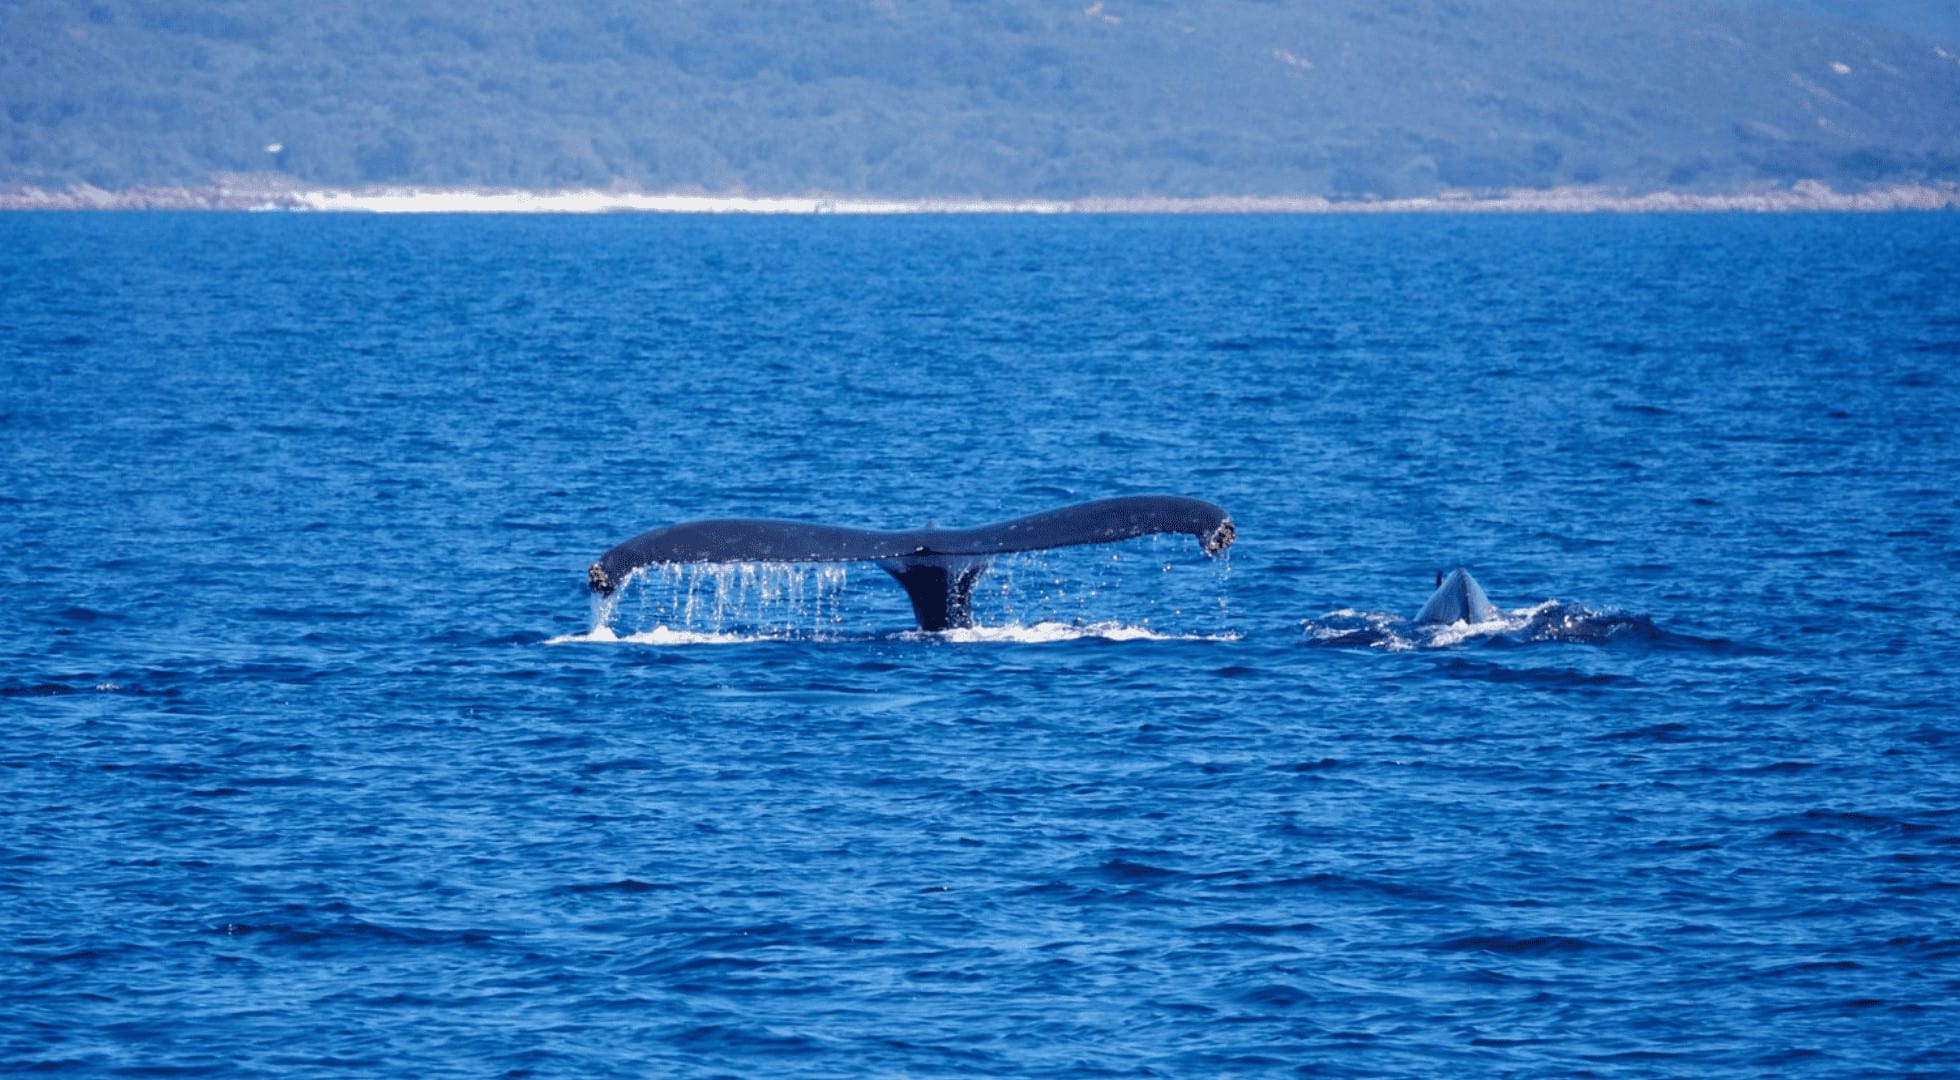 western australia travel guide - whale watching - margaret river